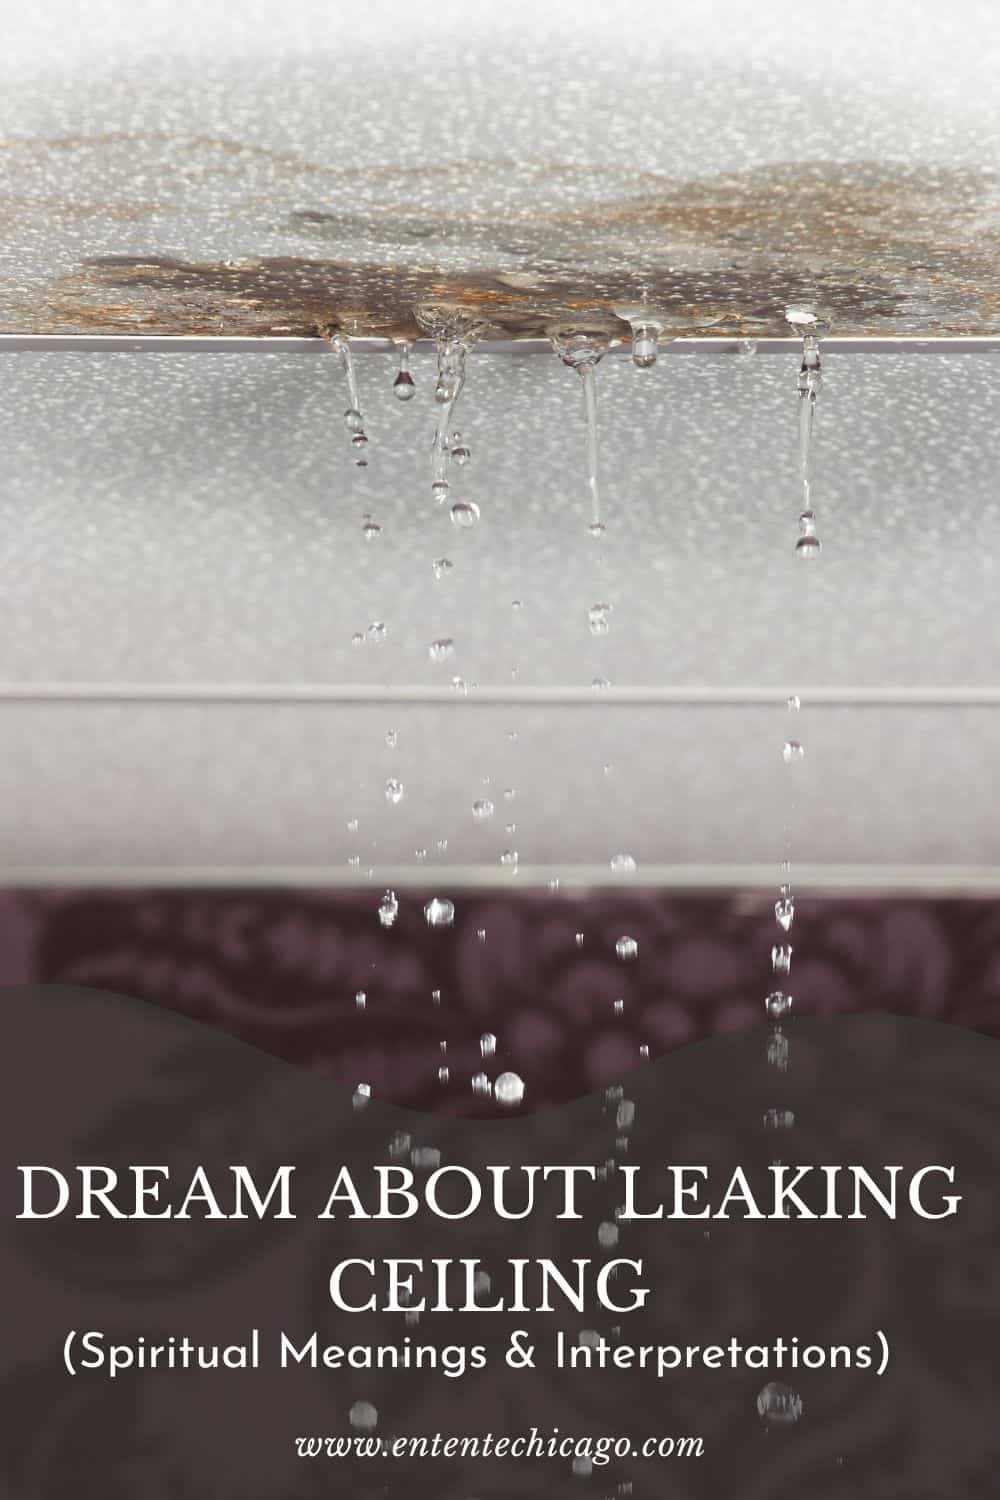 Dream About Leaking Ceiling (Spiritual Meanings & Interpretations)